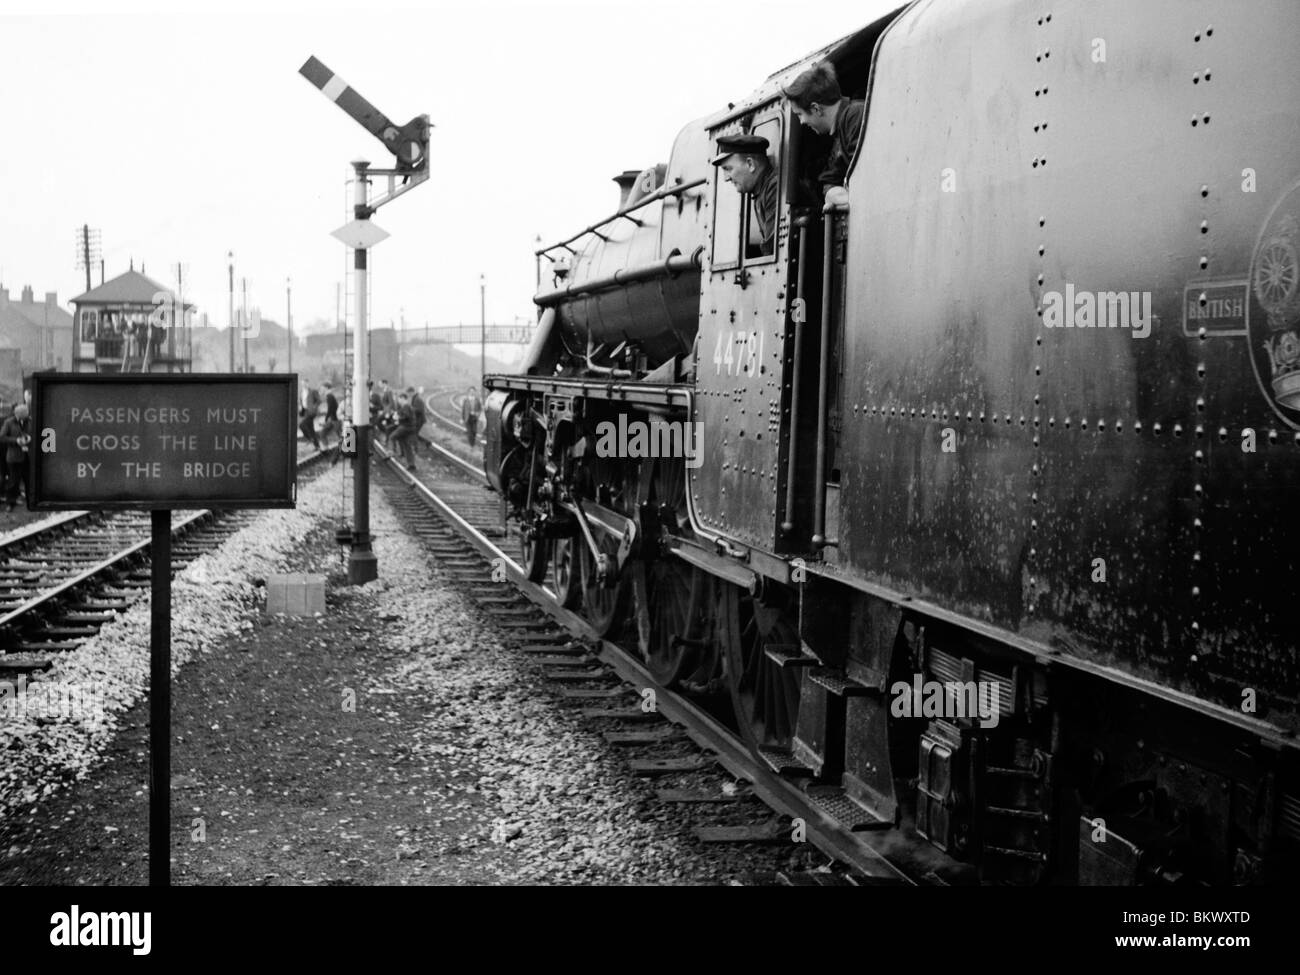 engine number 44781 stanier black 5 class heads an excursion during the last days of steam on british rail Stock Photo